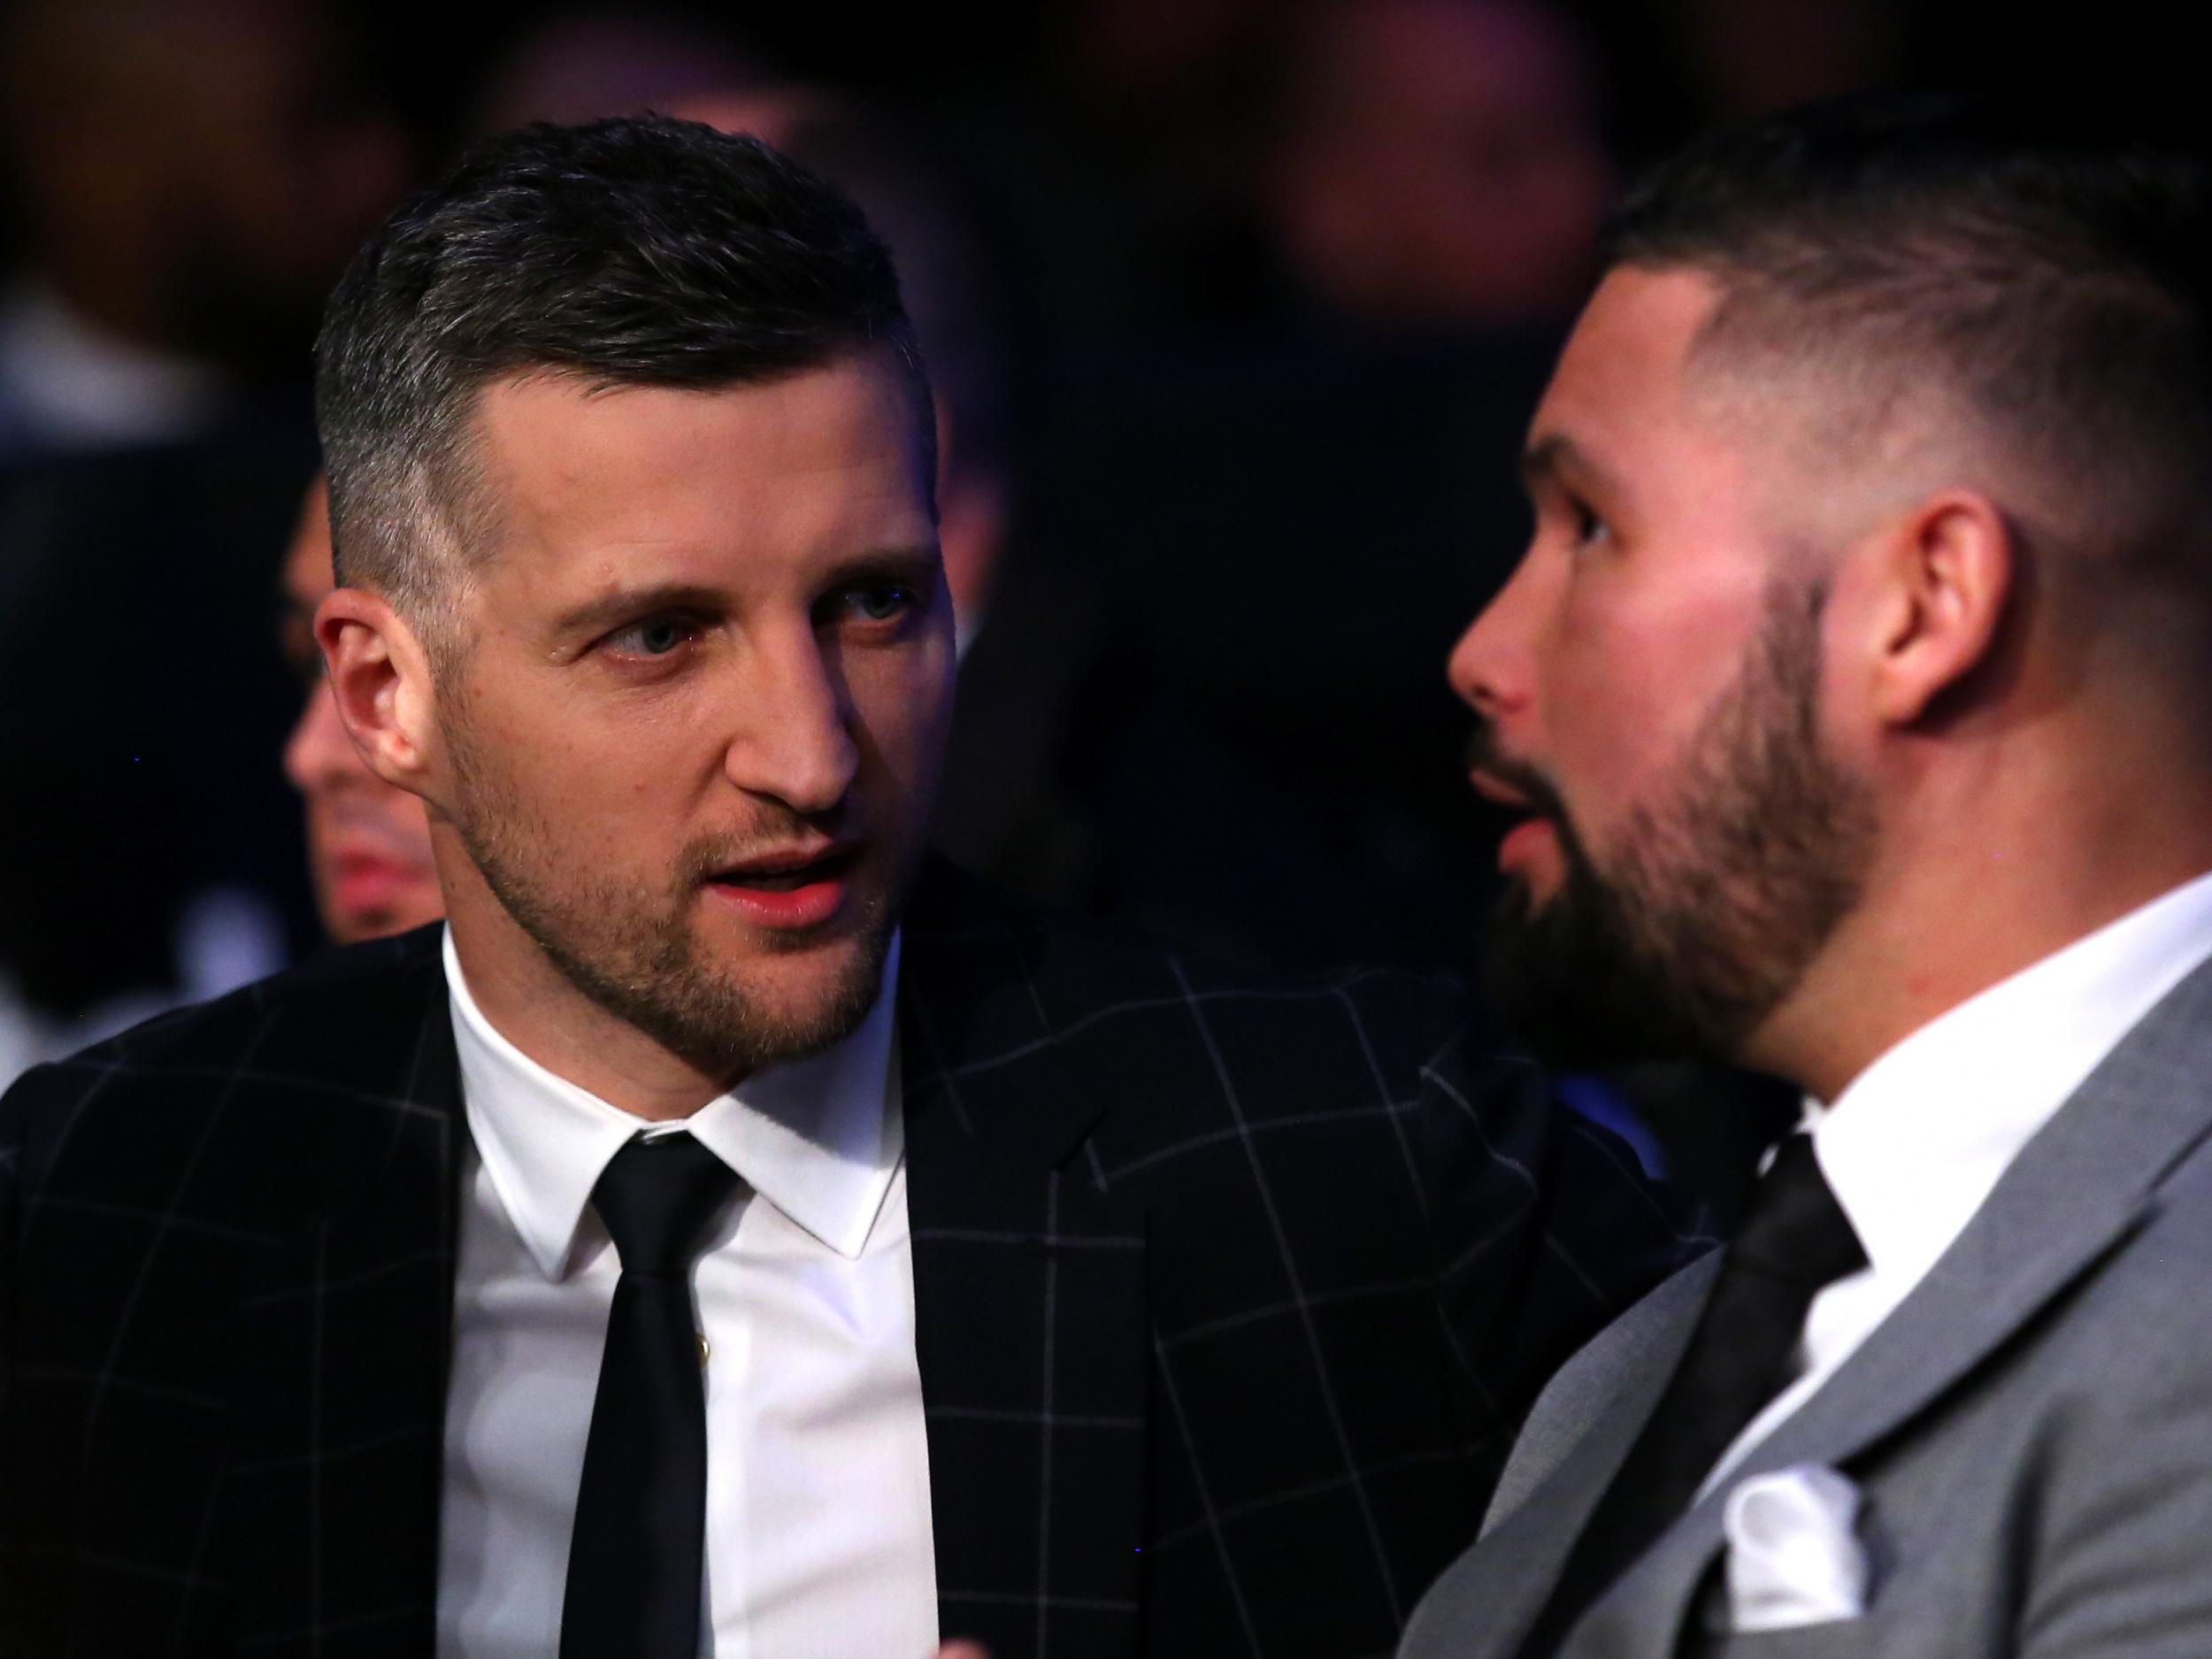 &#13;
Froch doesn't think McGregor has any chance of winning the fight &#13;